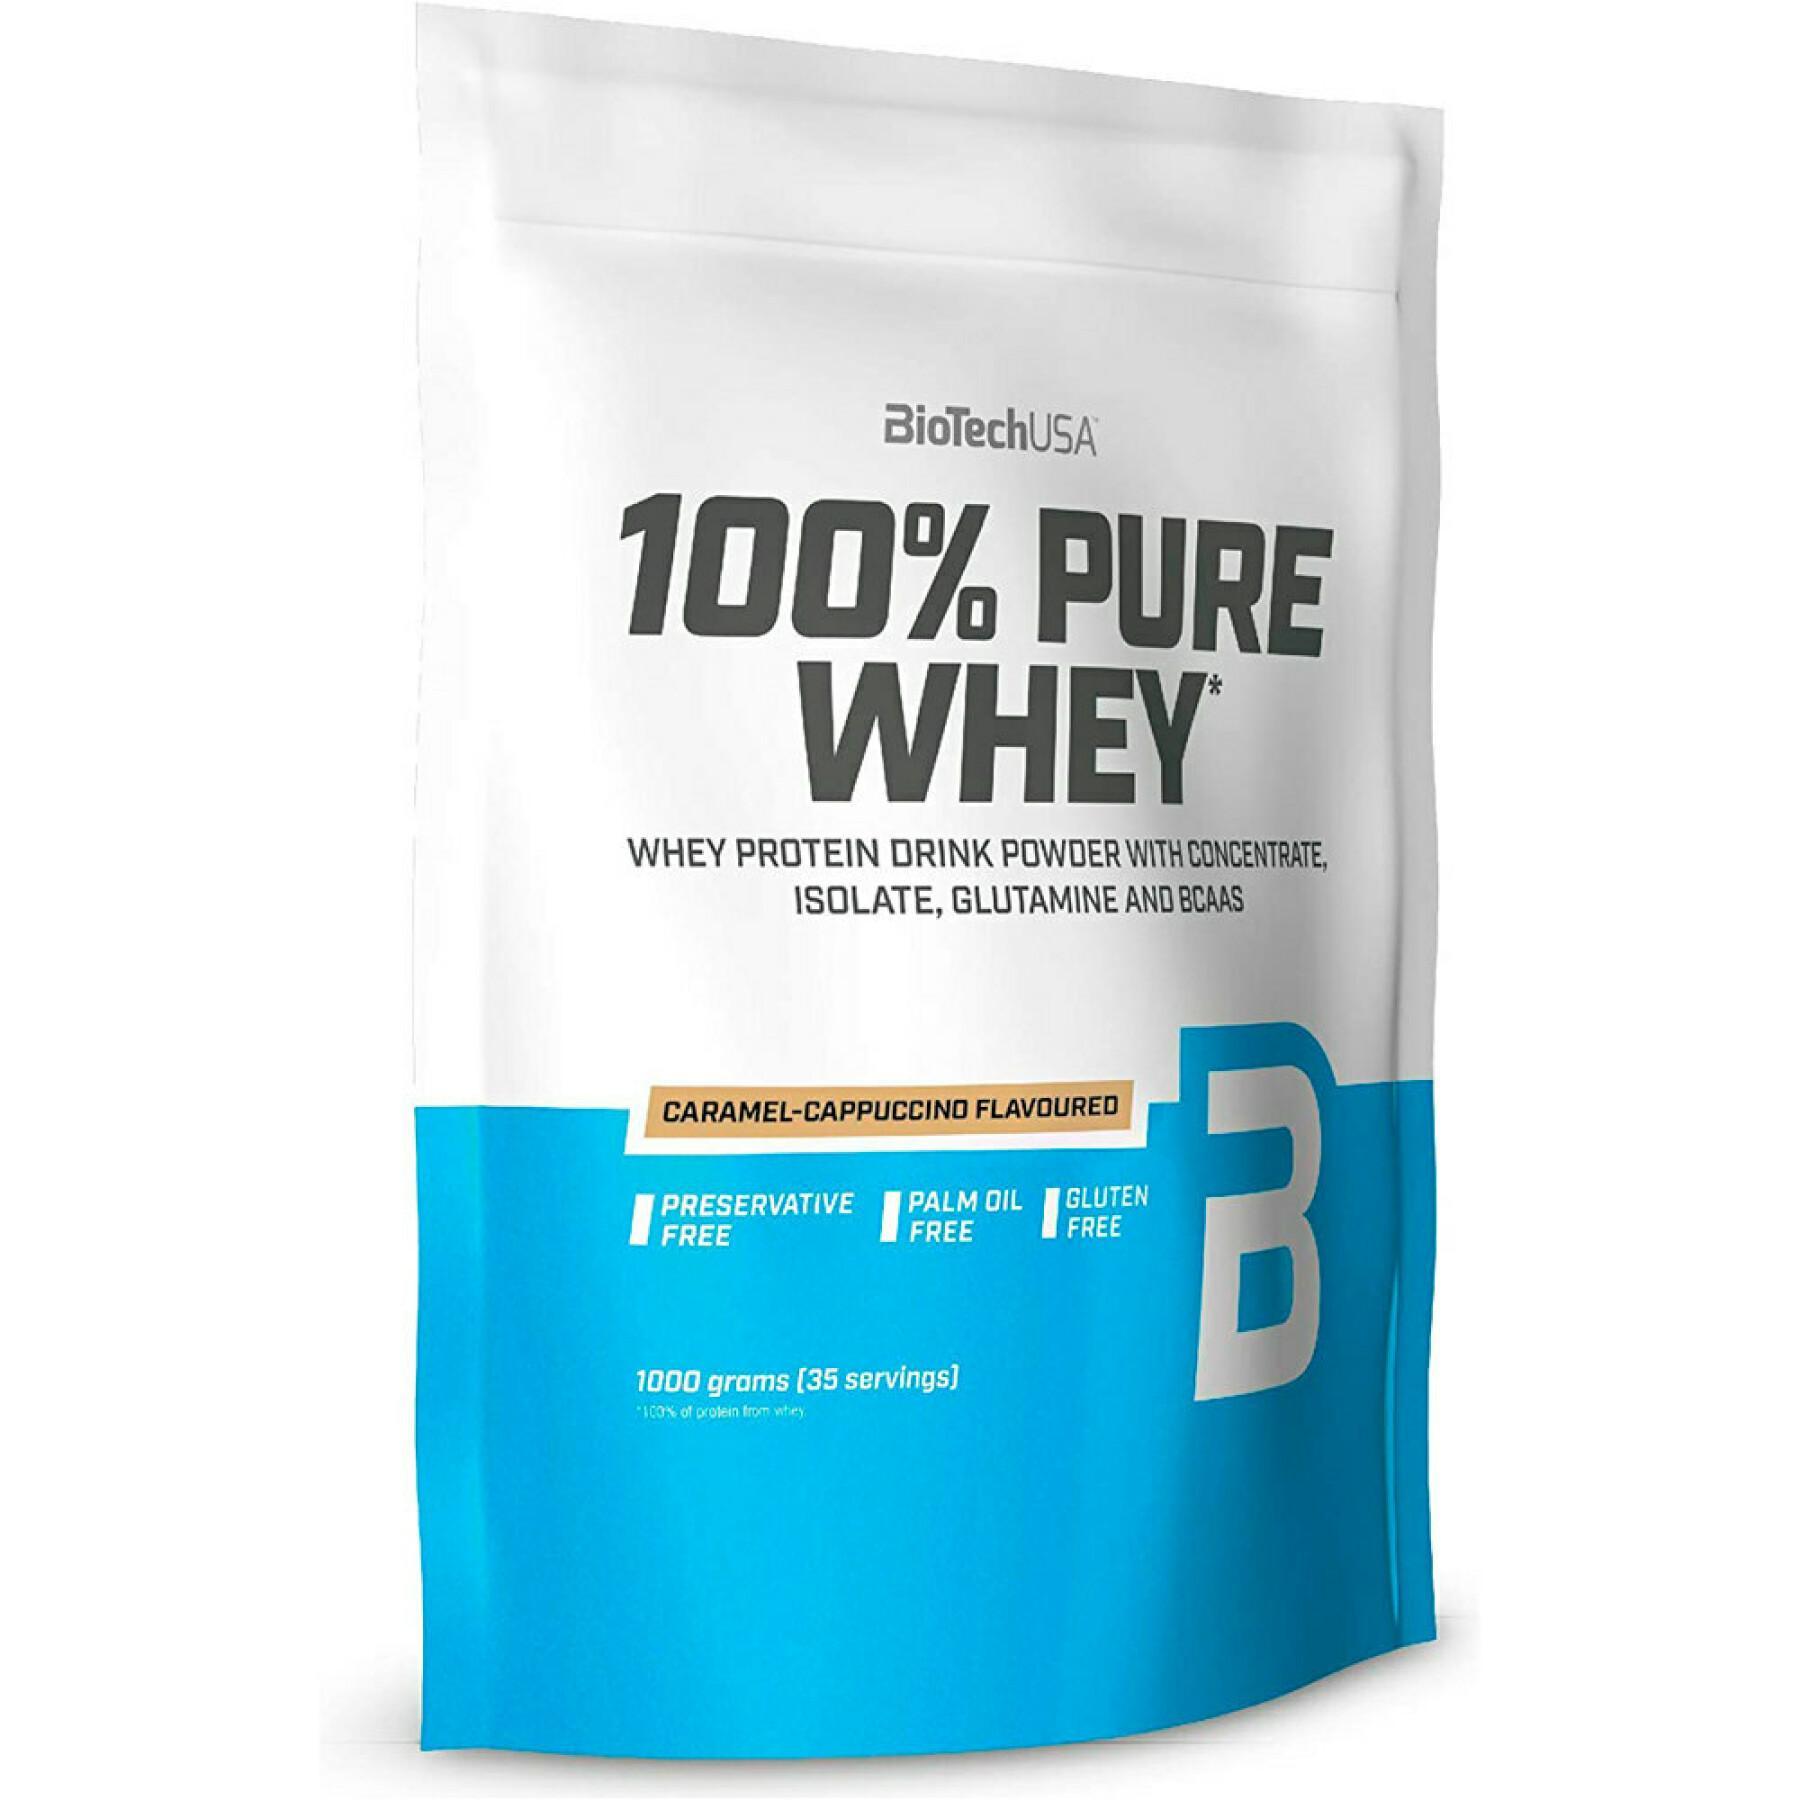 Lot of 10 bags of 100% pure whey protein Biotech USA - Caramel-cappuccino - 454g